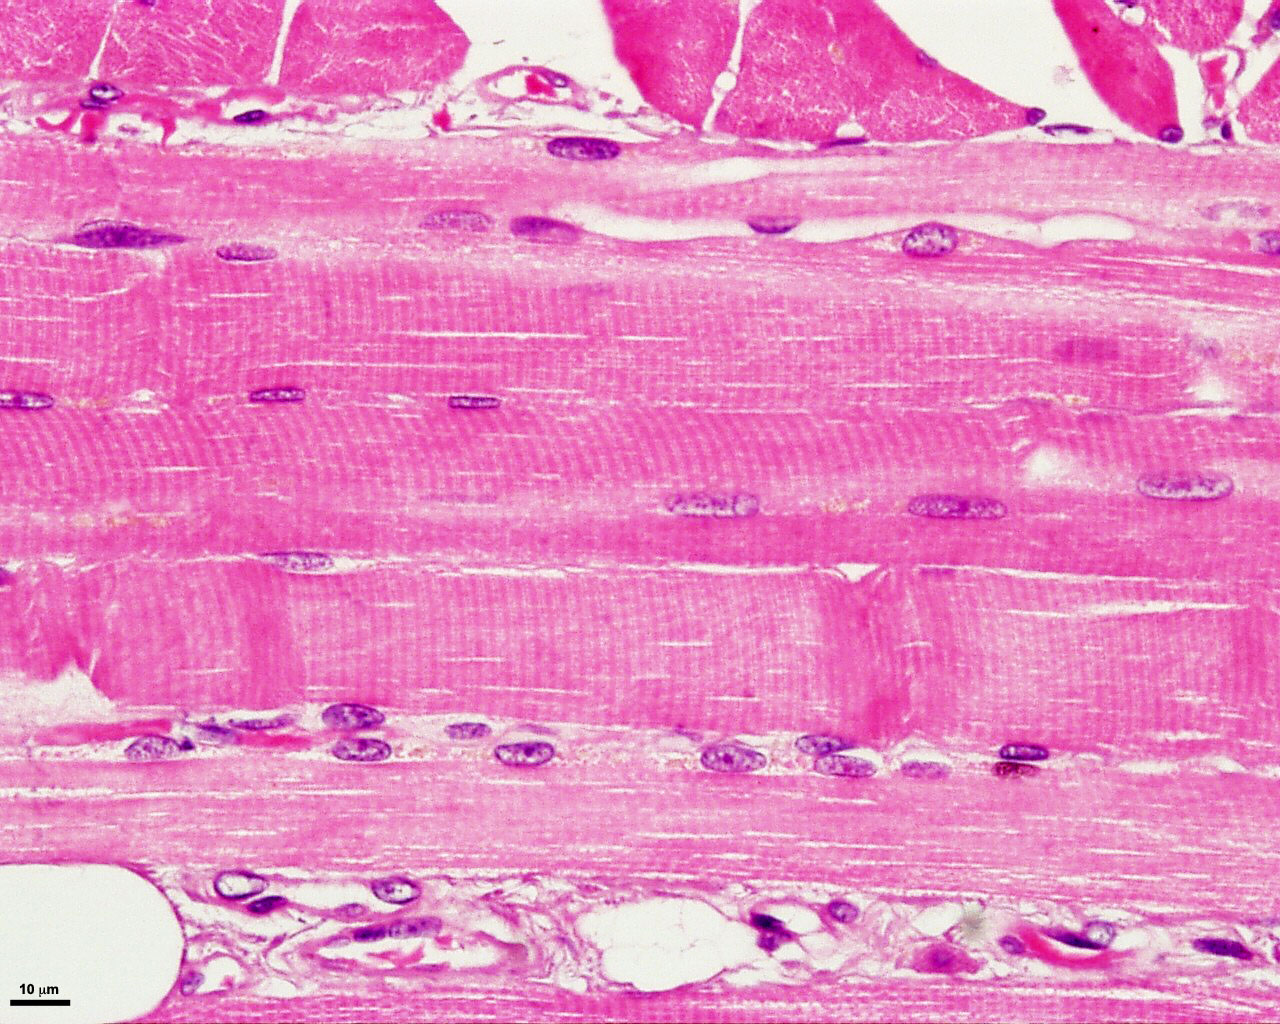 Skeletal Muscle Tissue Under Microscope Labeled - Micropedia